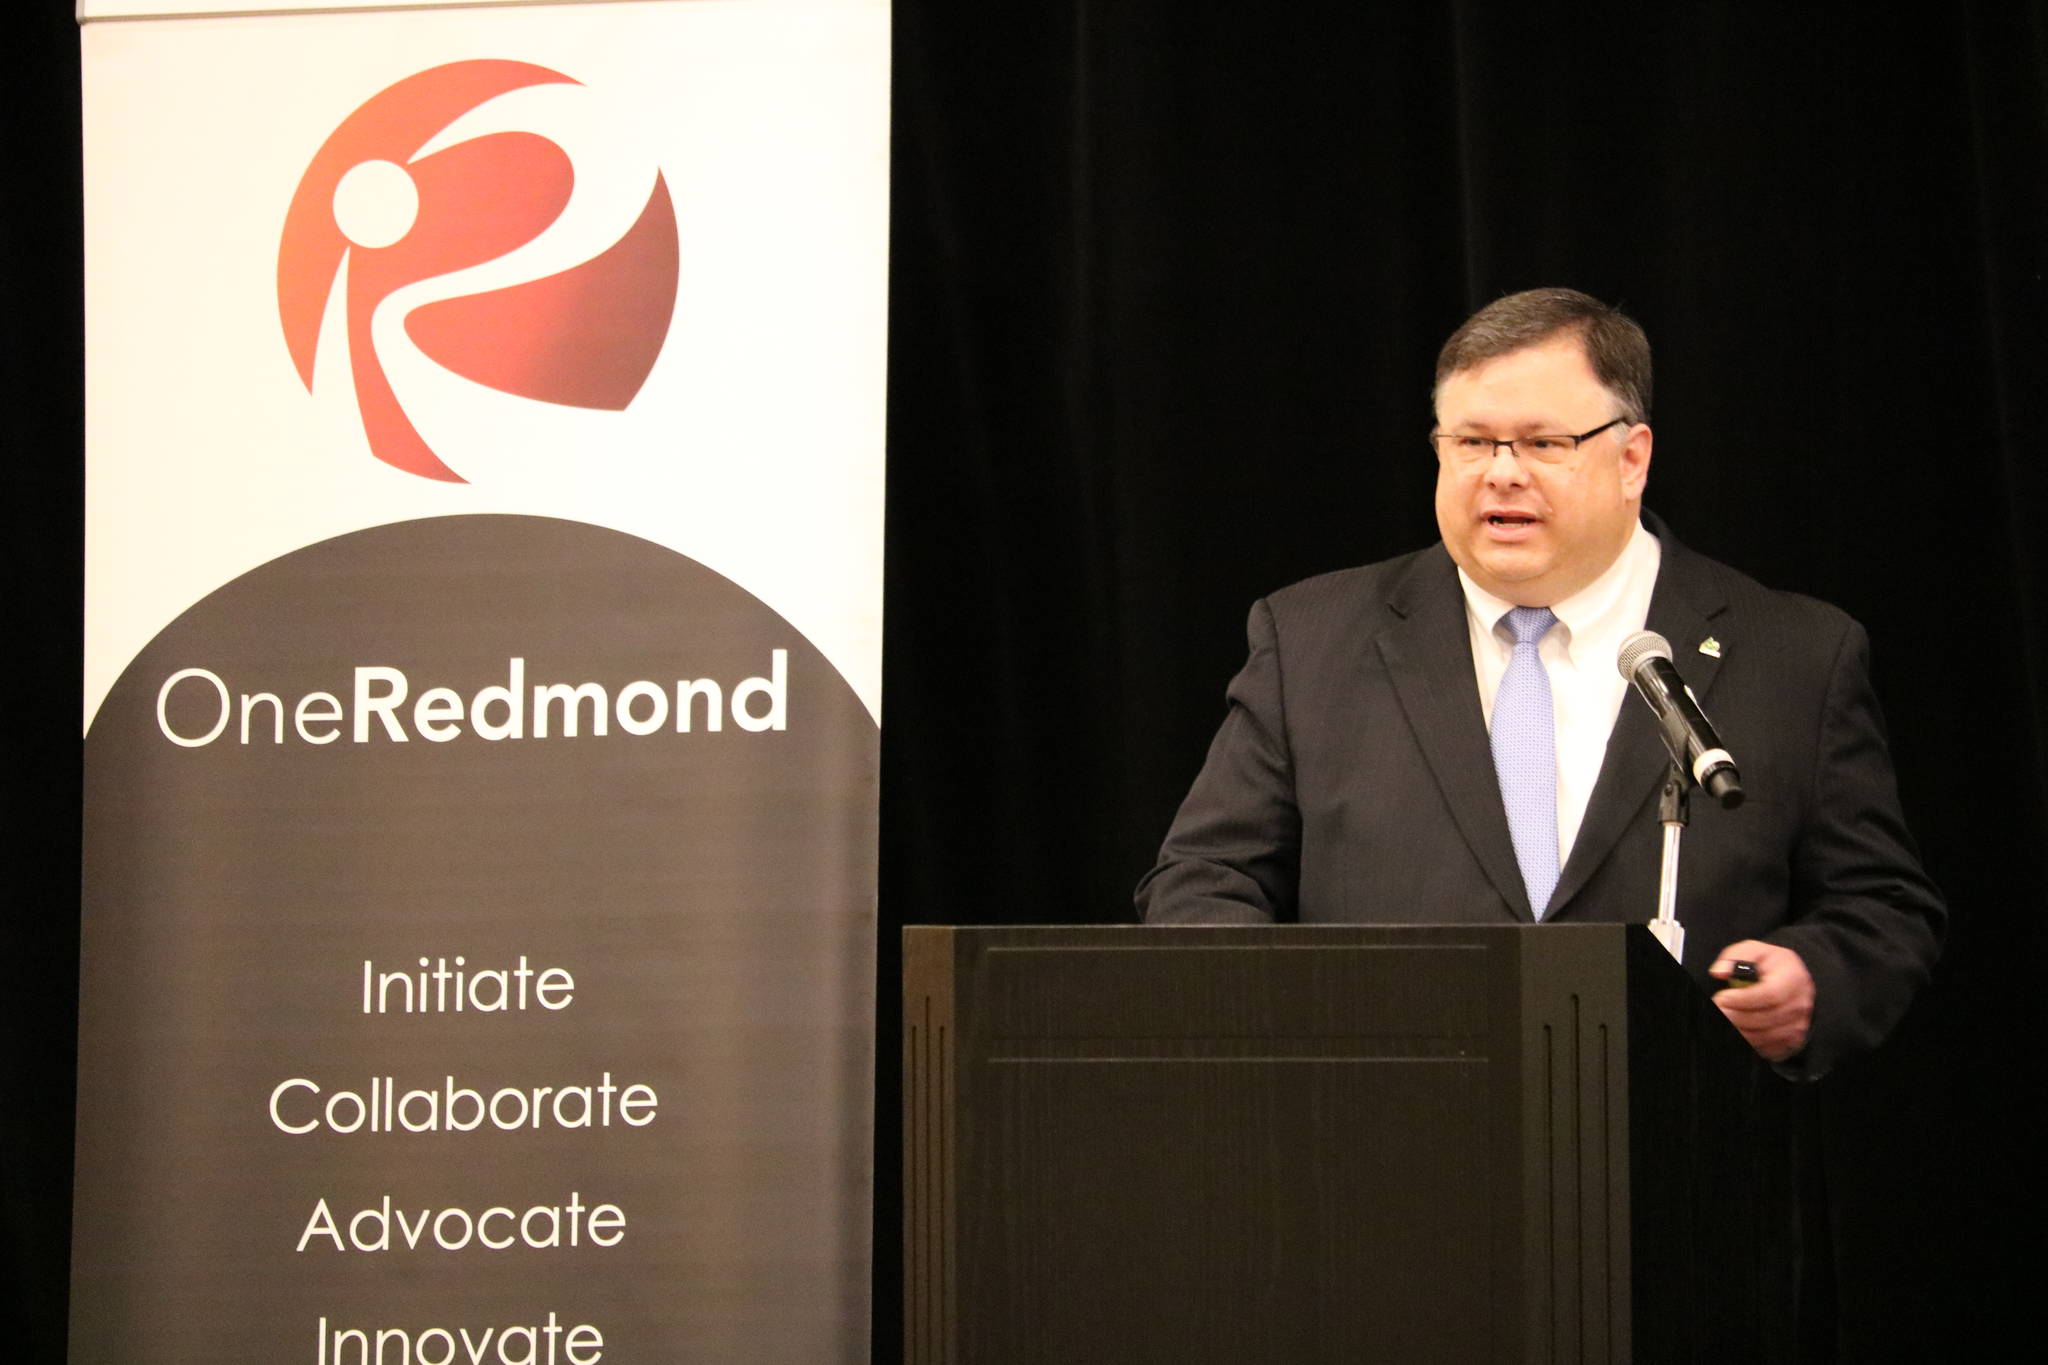 Mayor John Marchione gives the Redmond state of the city address on Thursday morning. Aaron Kunkler, Redmond Reporter